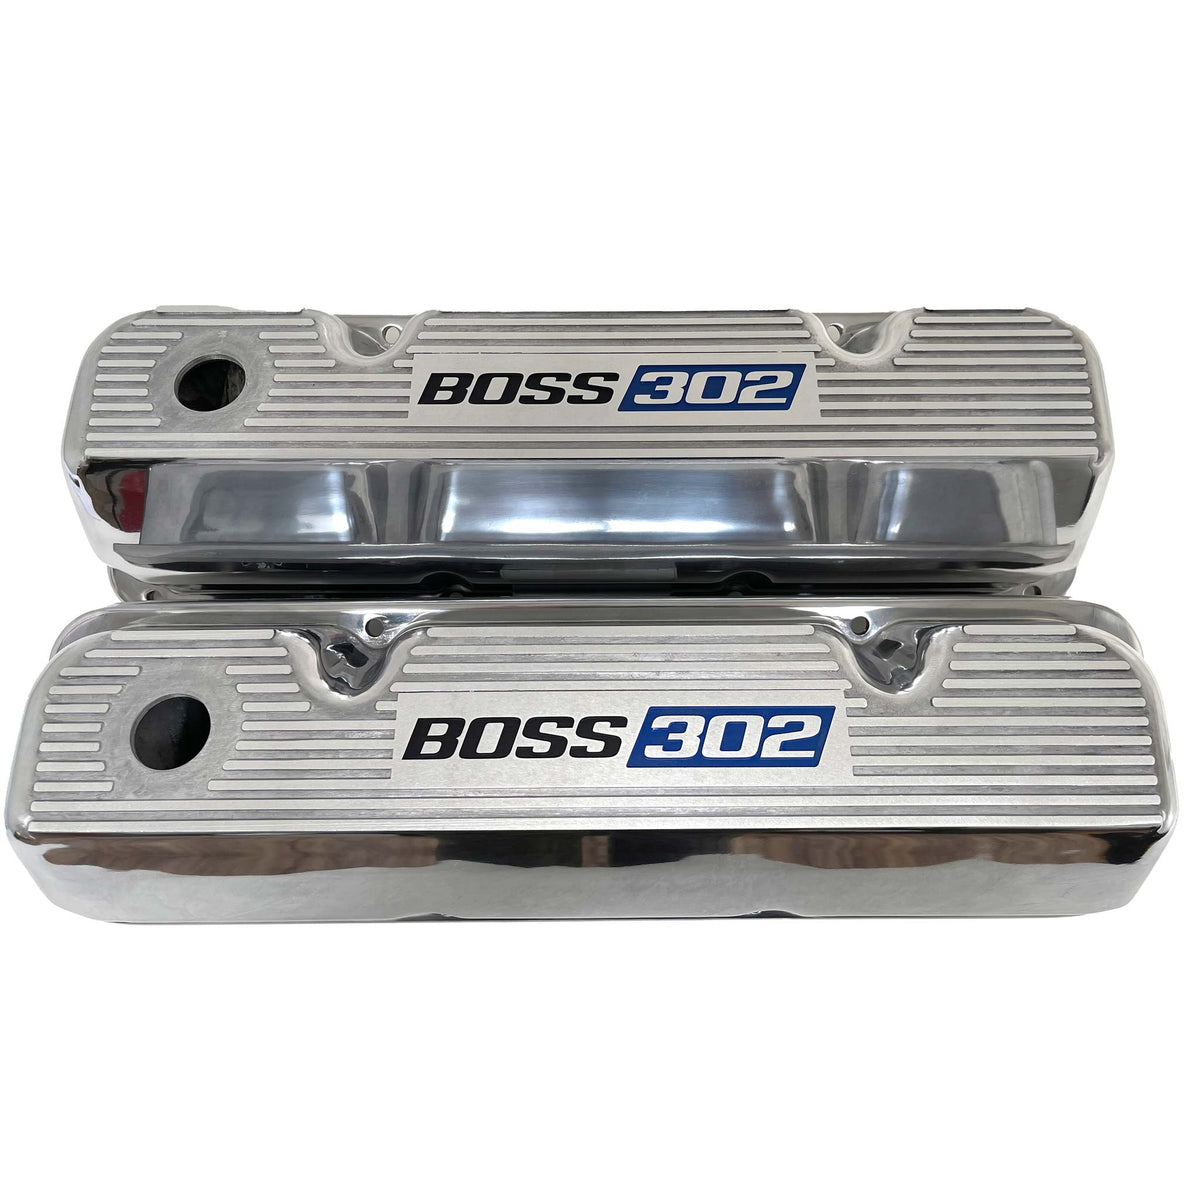 Ford BOSS 302 Valve Covers Blue Logo - 351 Cleveland - Polished